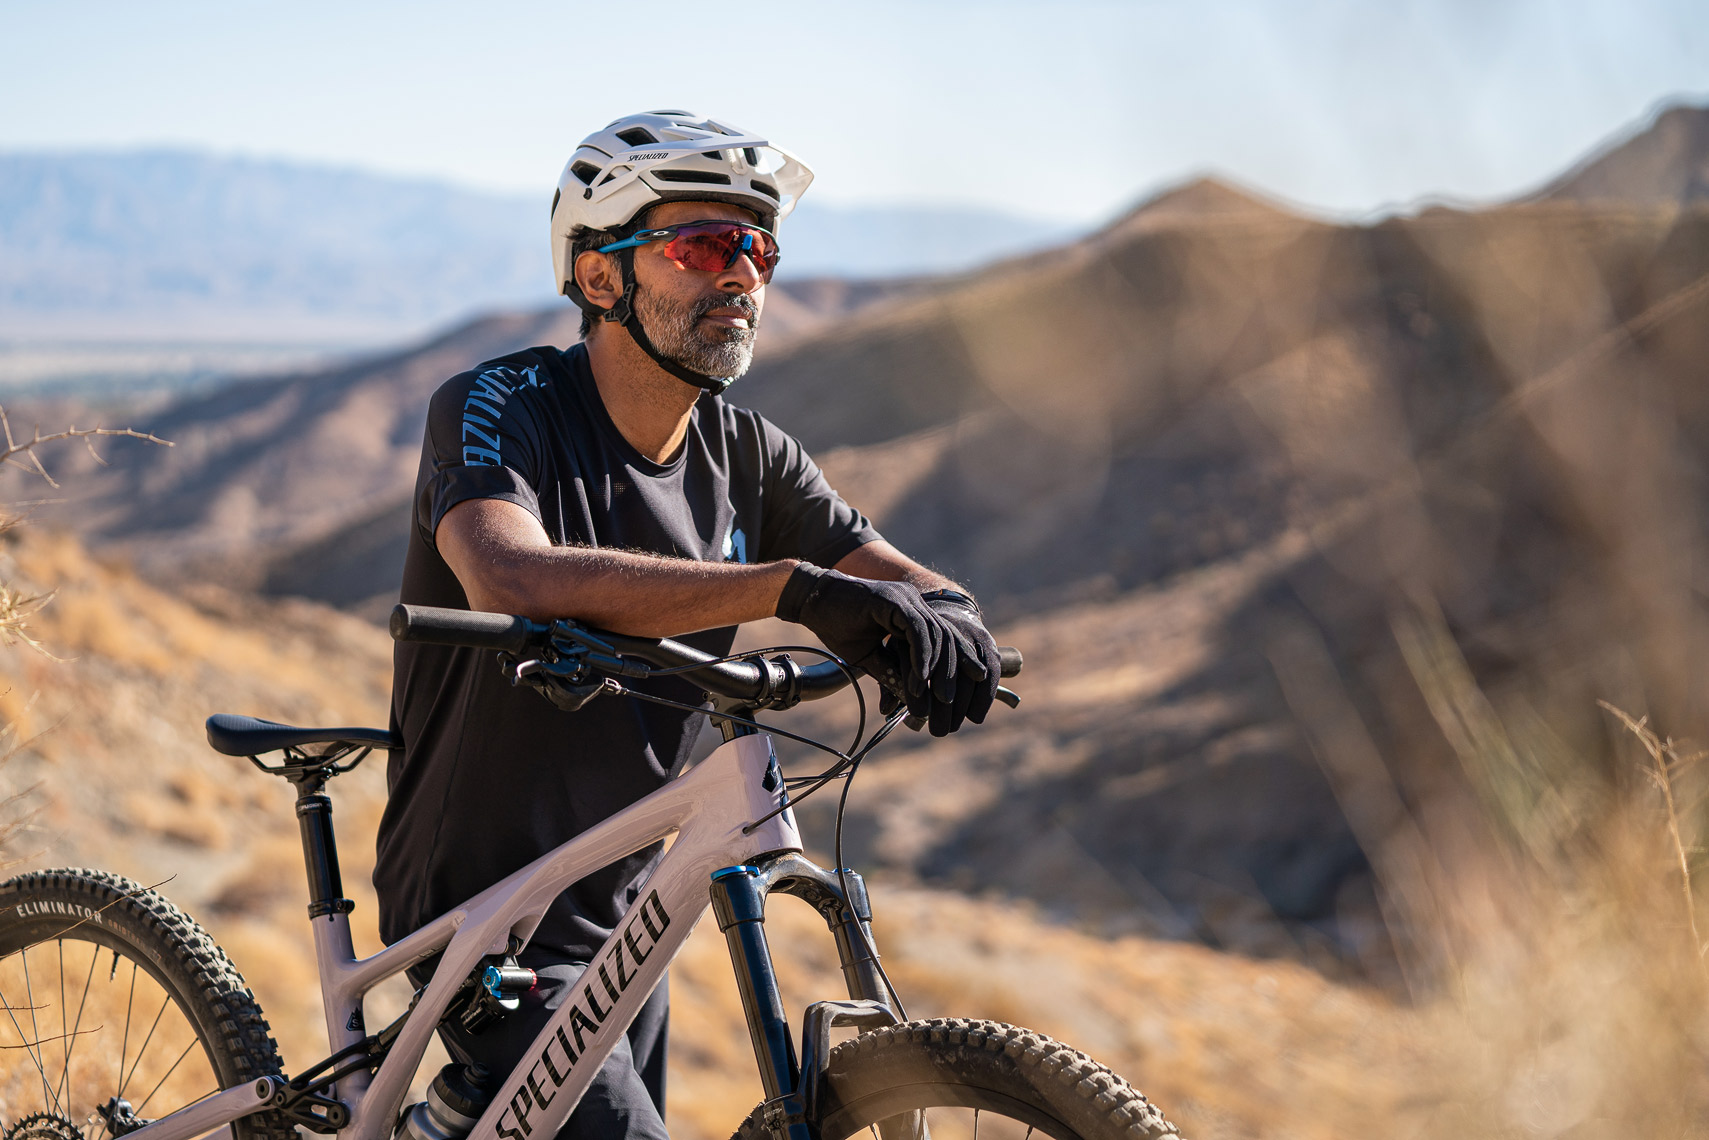 Specialized_S21_MTB_Clothing_Palm_Springs_VanWeelden-257